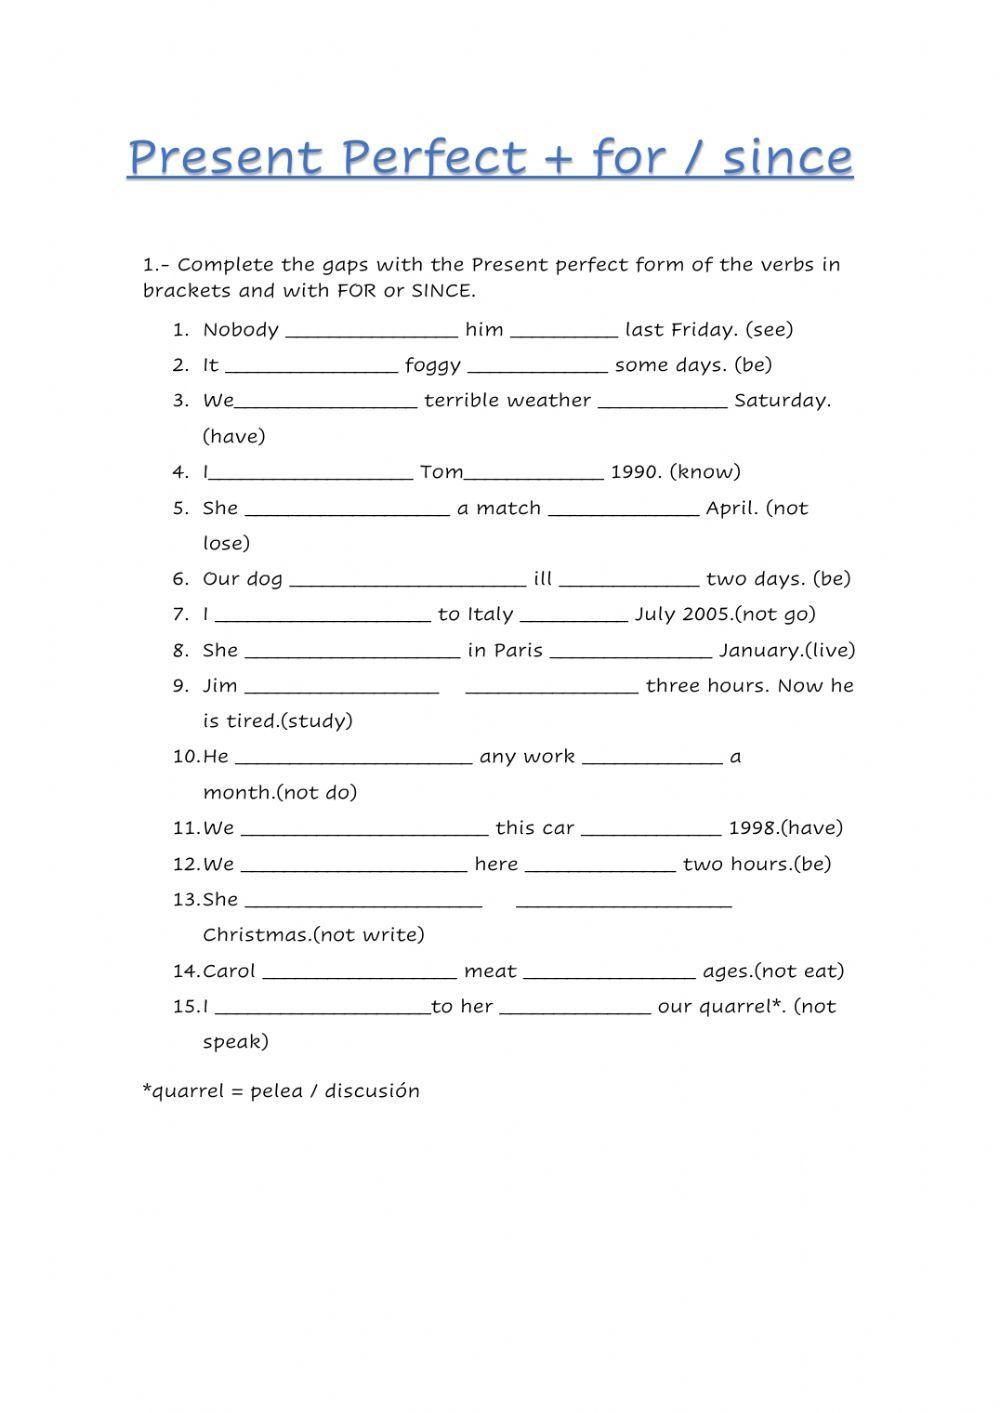 Present perfect simple with for or since